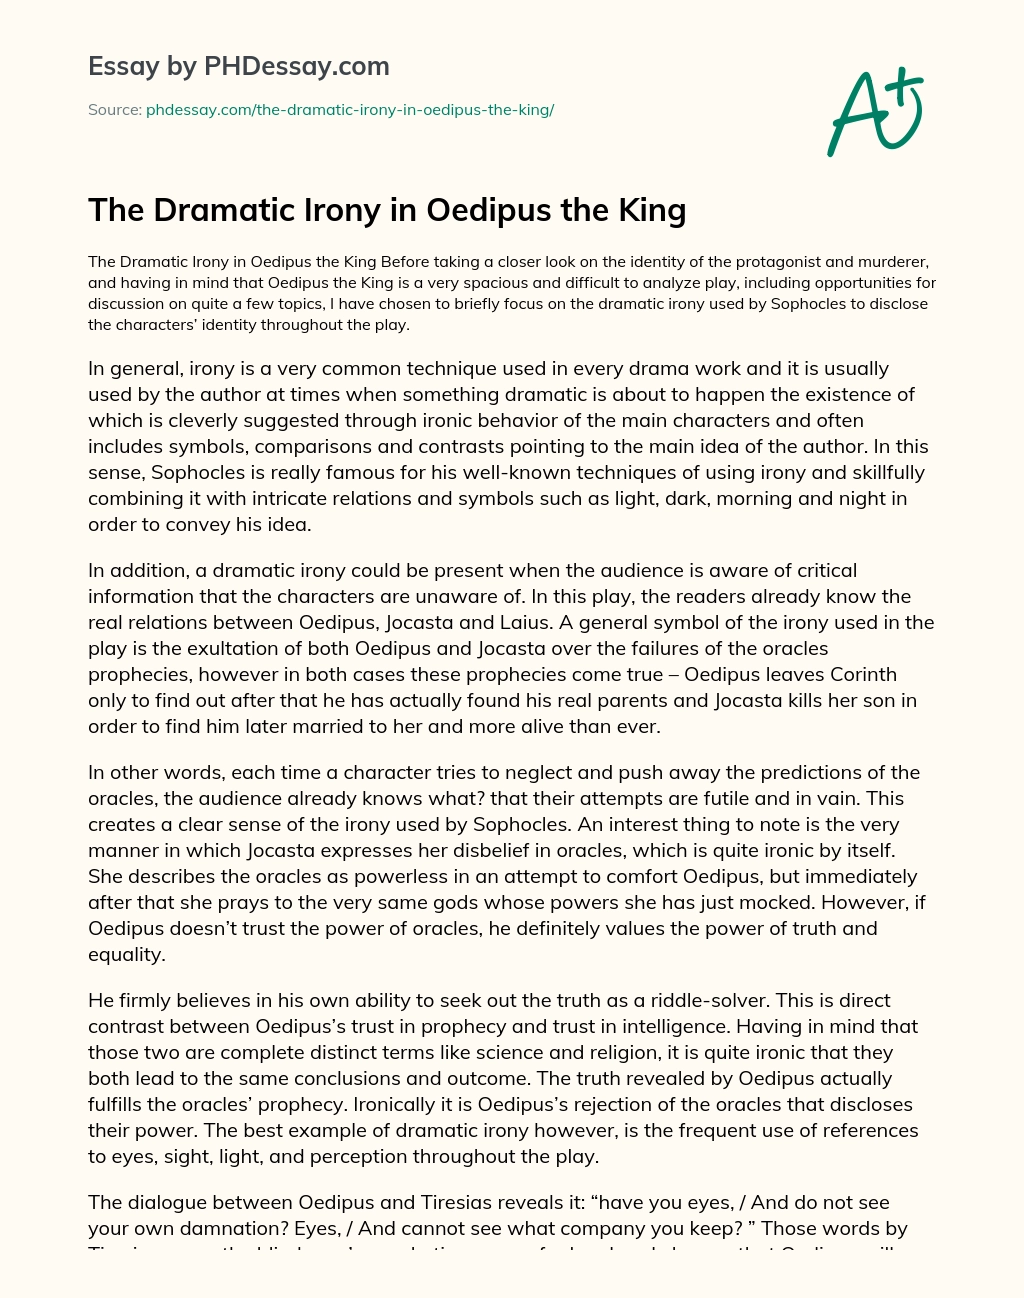 essay oedipus the king